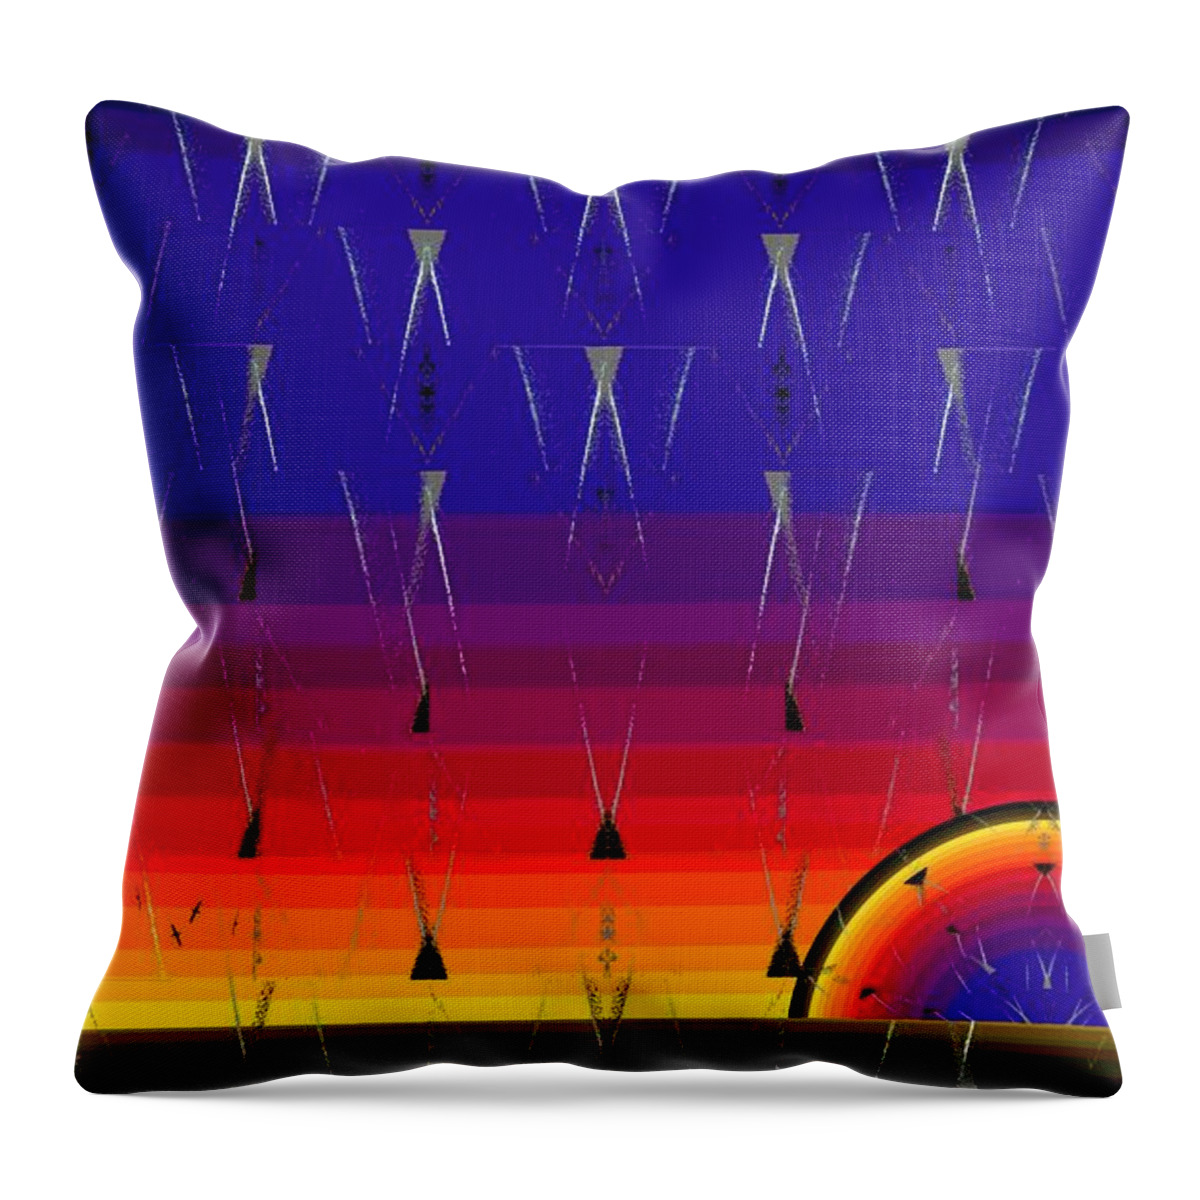 Abstract Throw Pillow featuring the digital art The Meeting by Tim Allen